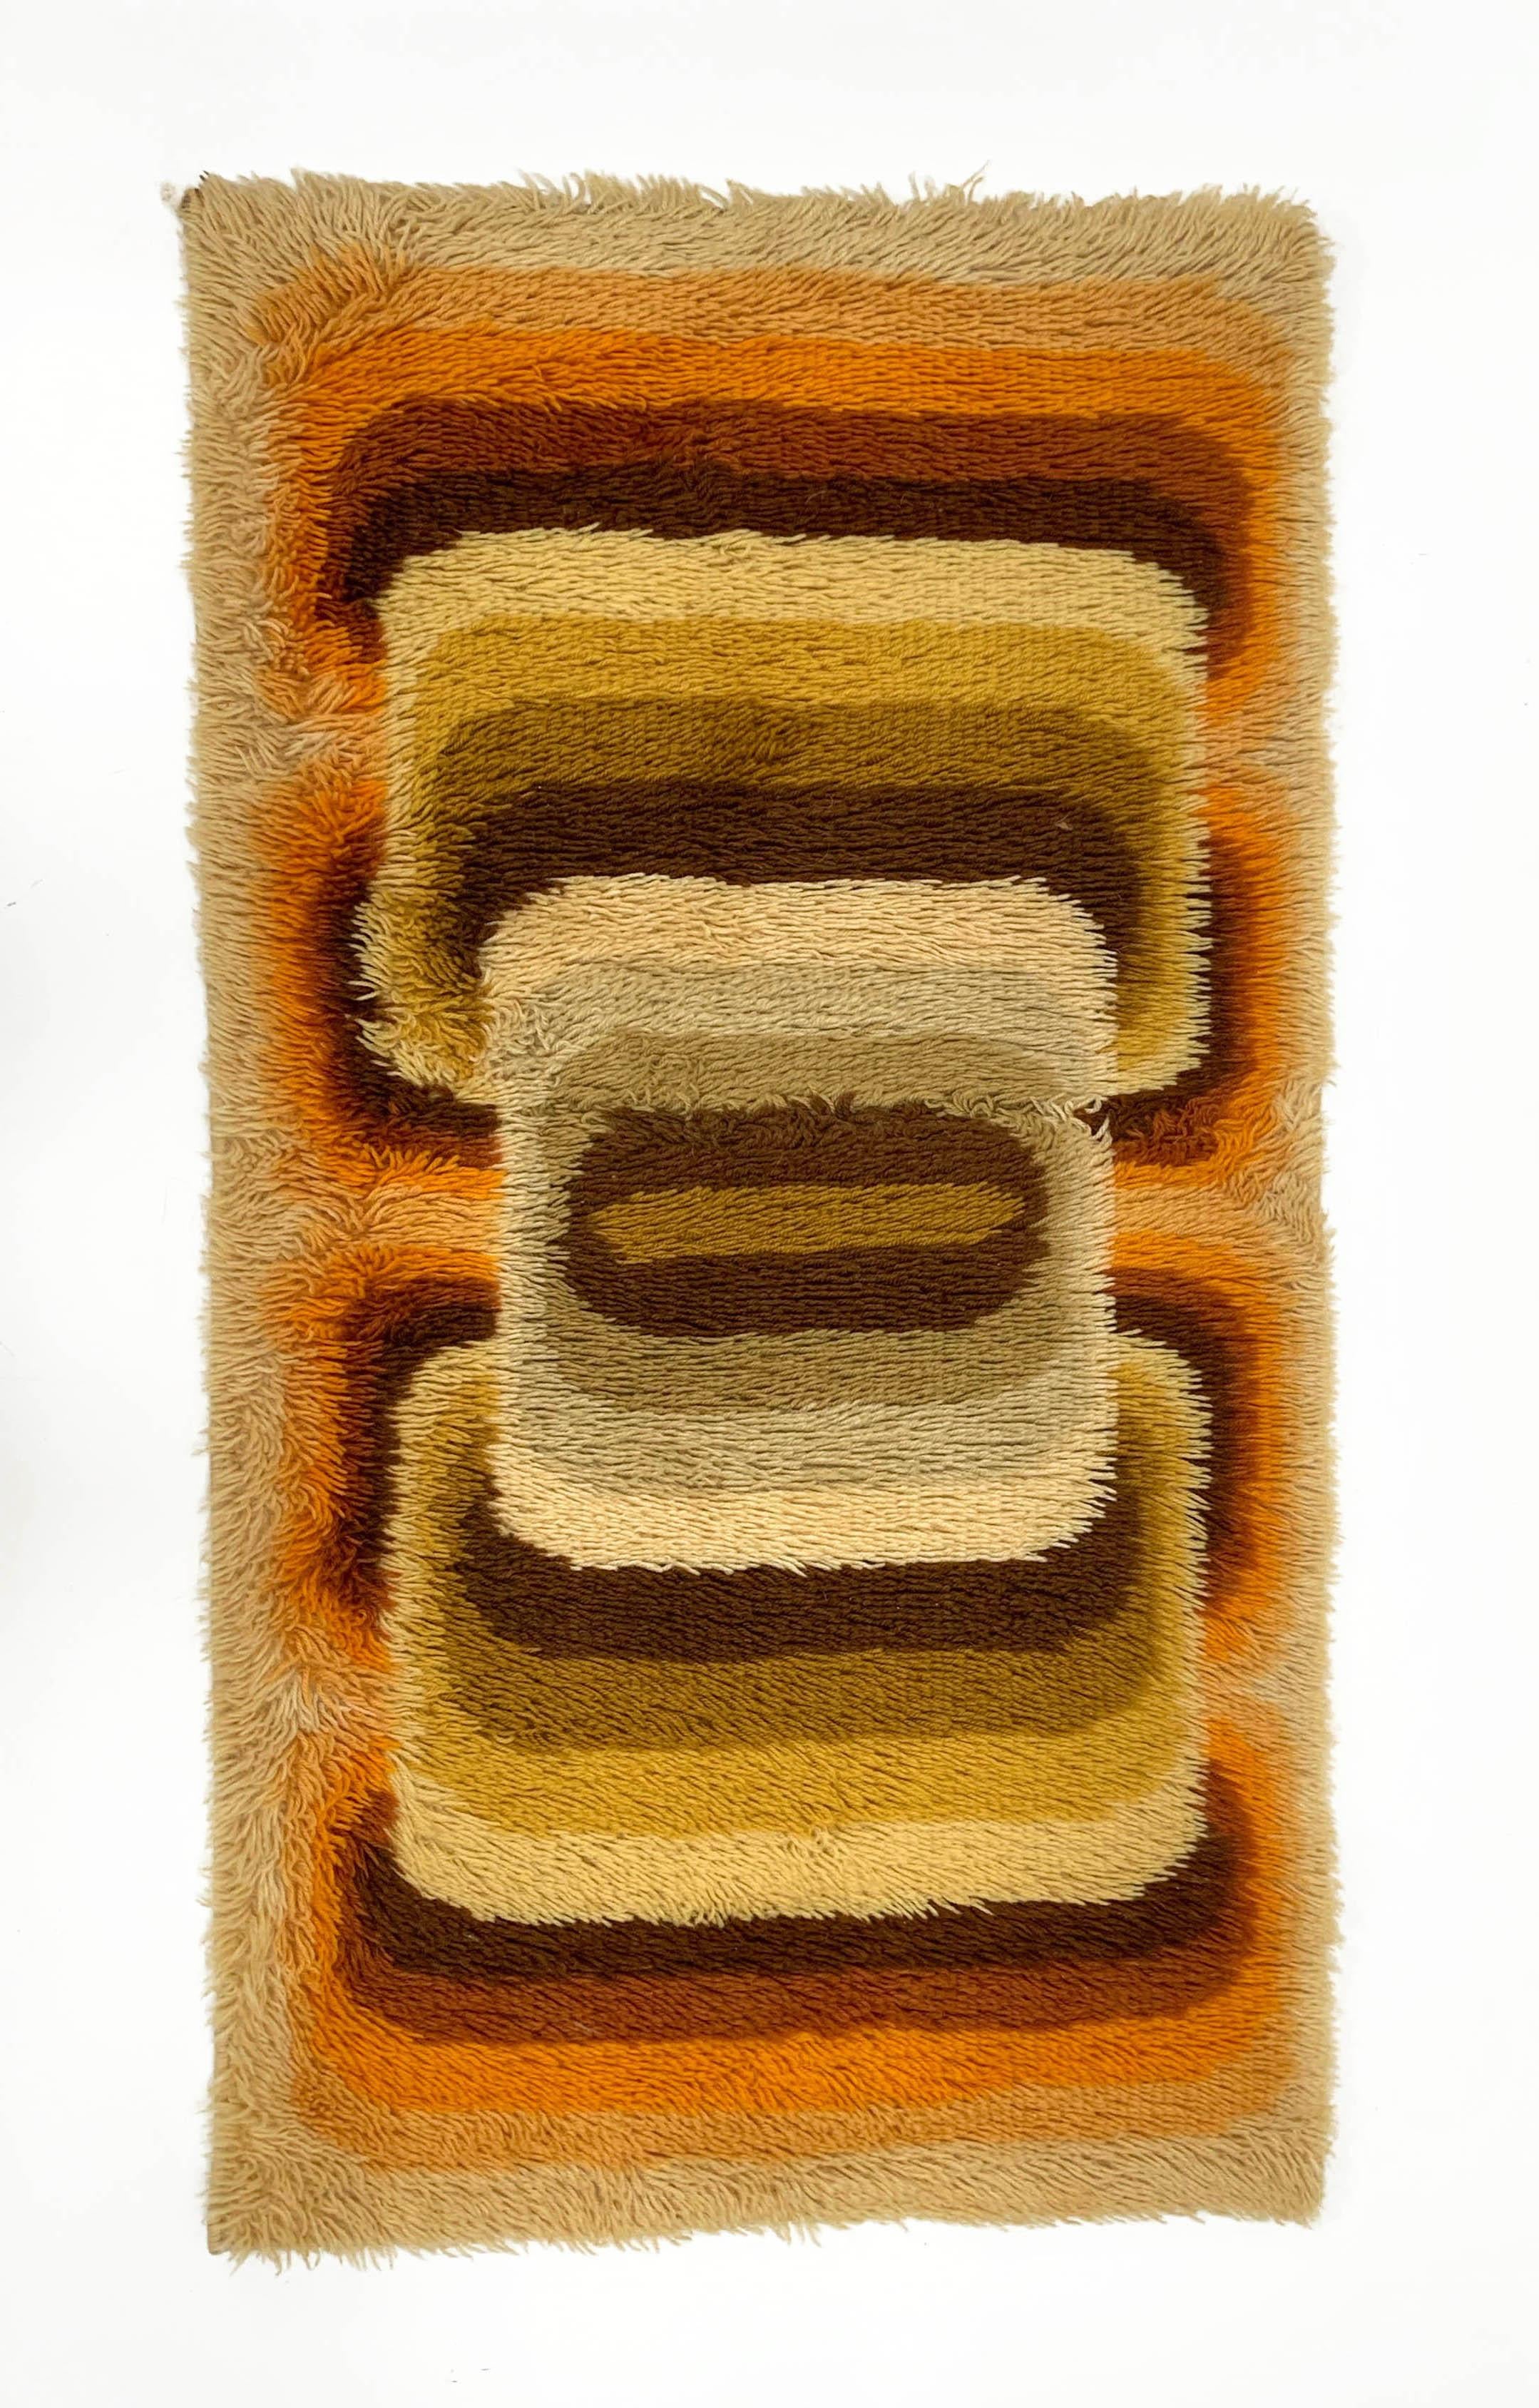 Amazing midcentury yellow, beige, brown and orange pure virgin wool rug. This wonderful carpet was produced by Samit Borgosesia in Italy during the 1970s.

This item is entirely made of the purest New Zealand virgin wool with yellow, beige, brown